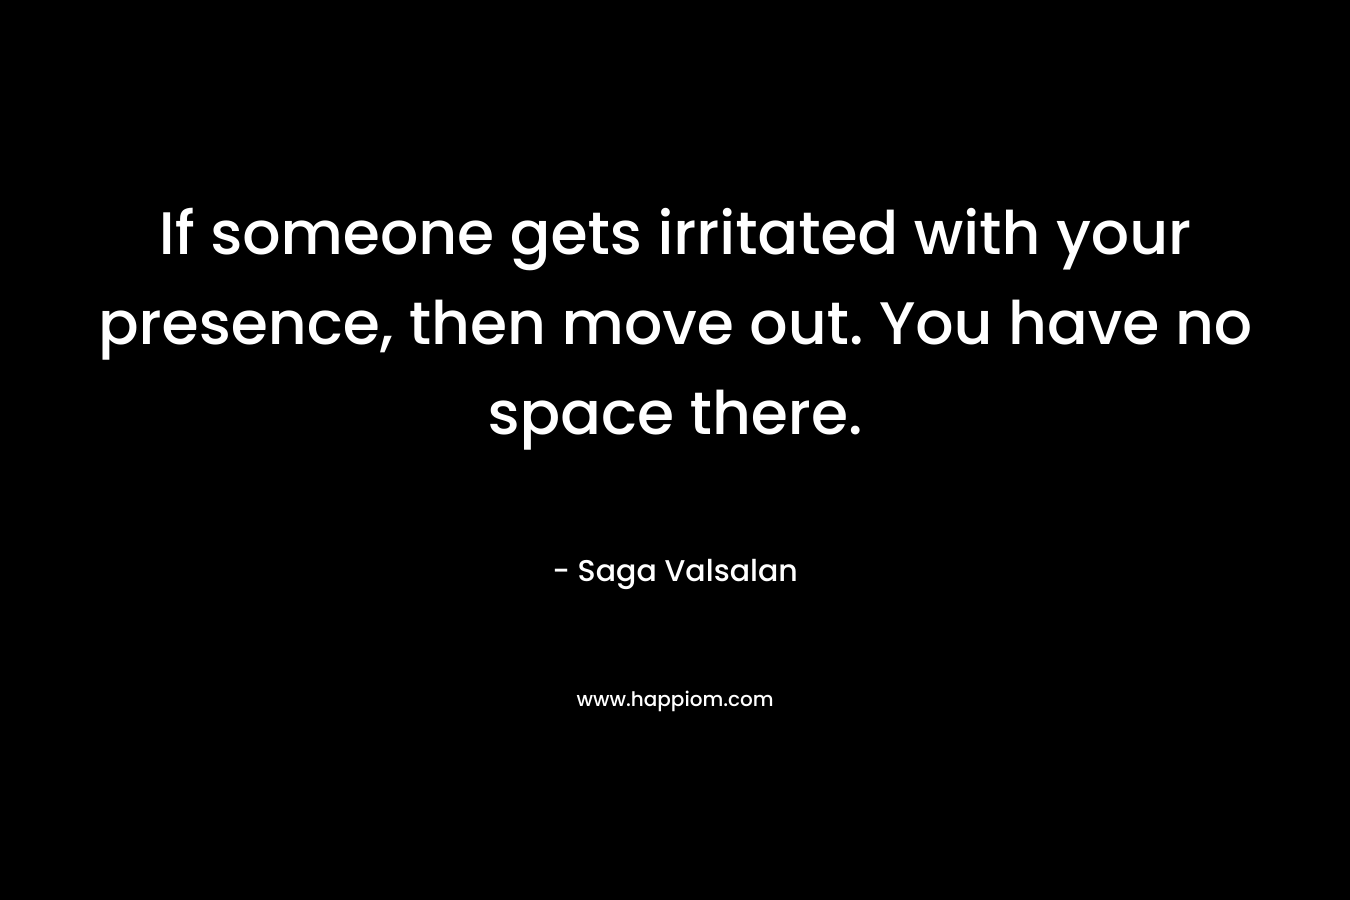 If someone gets irritated with your presence, then move out. You have no space there. – Saga Valsalan